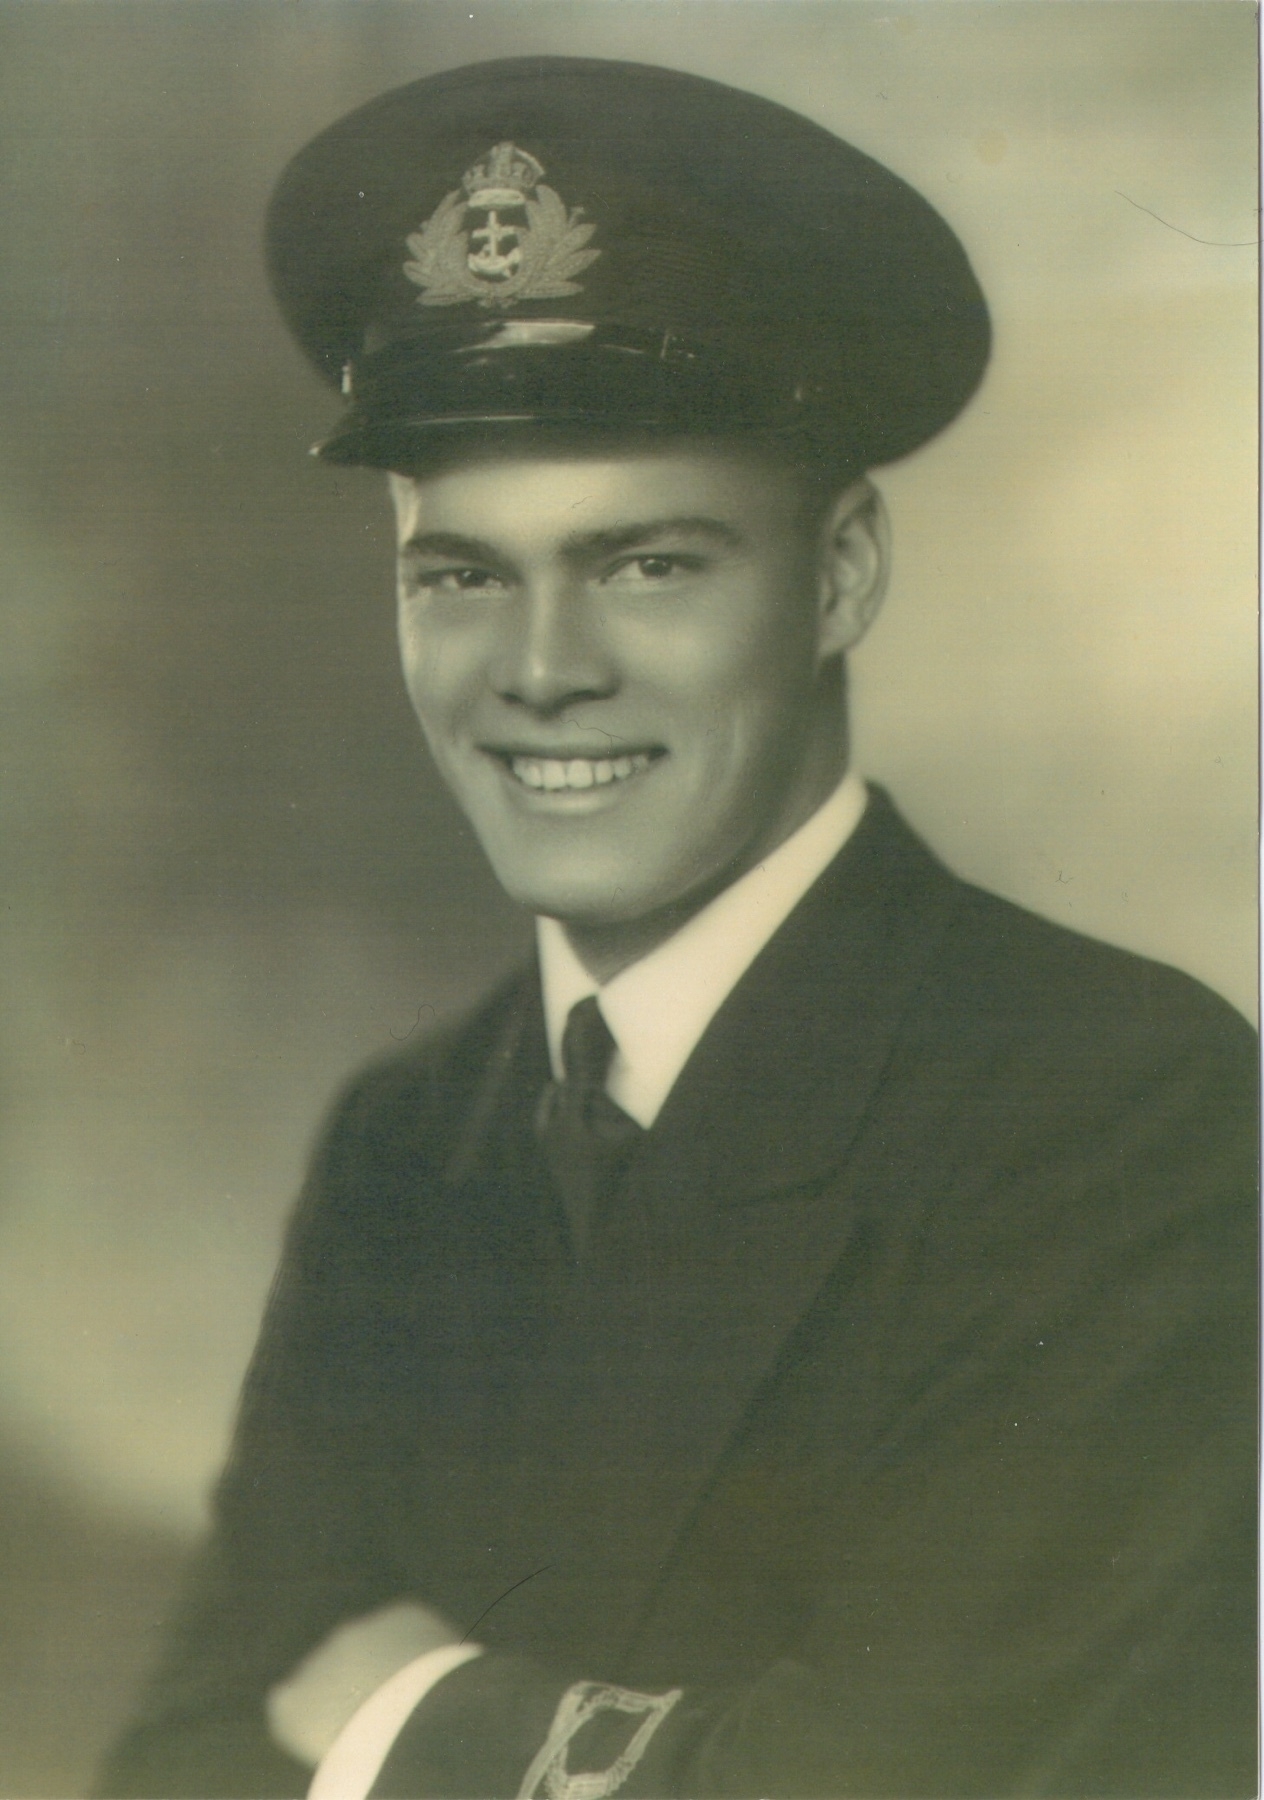 A portrait photo of my grandfather as a young man in a navy uniform